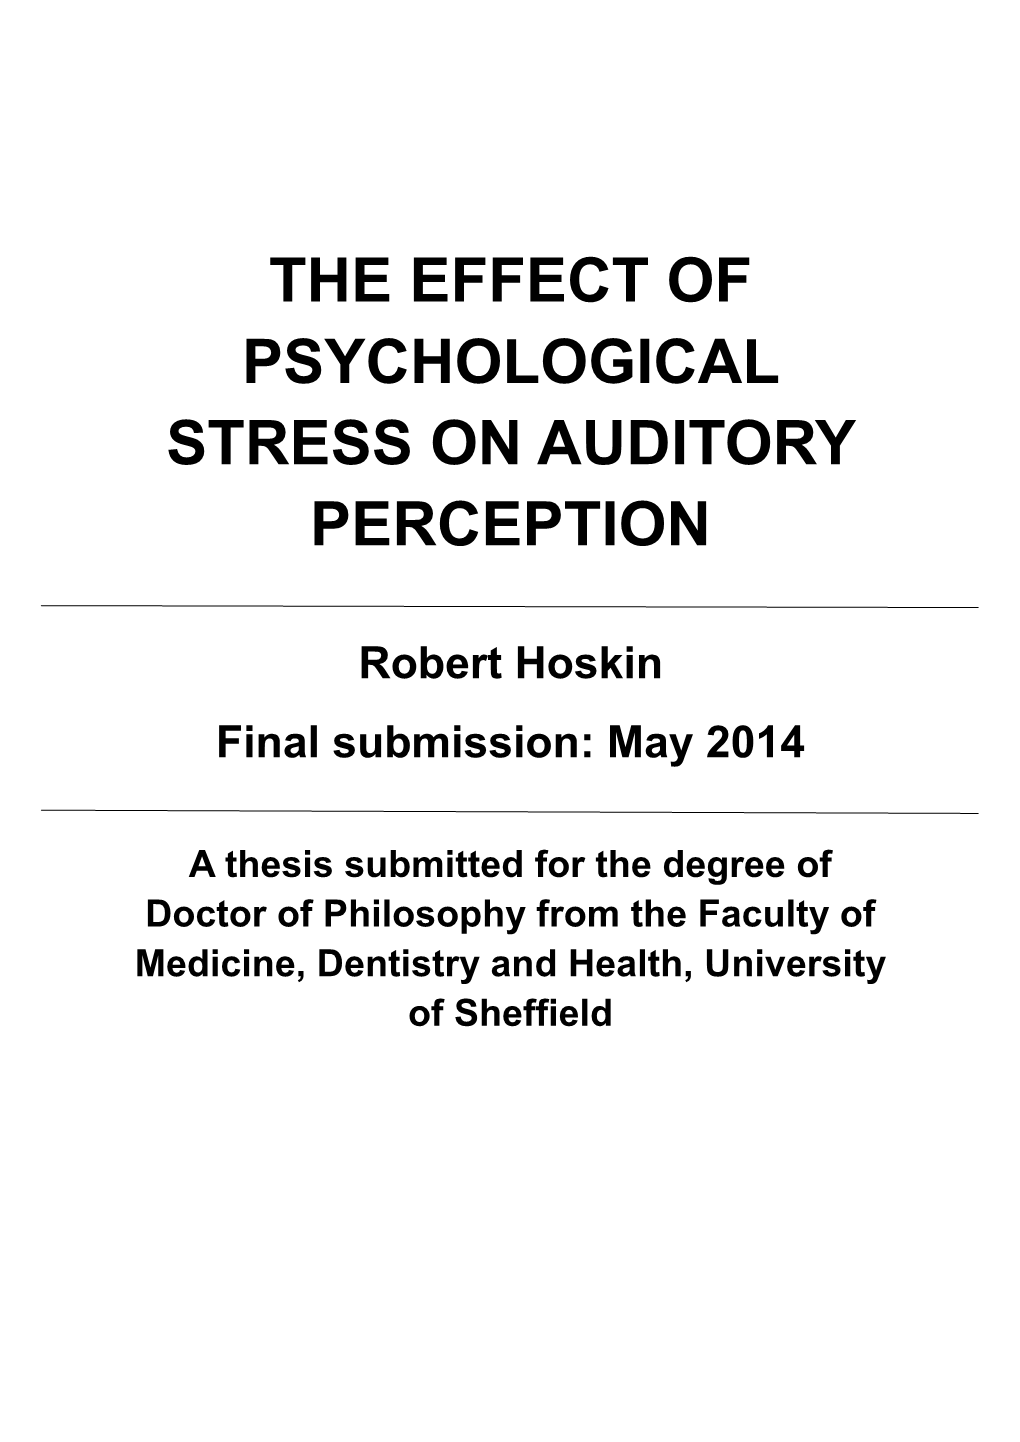 The Effect of Psychological Stress on Auditory Perception